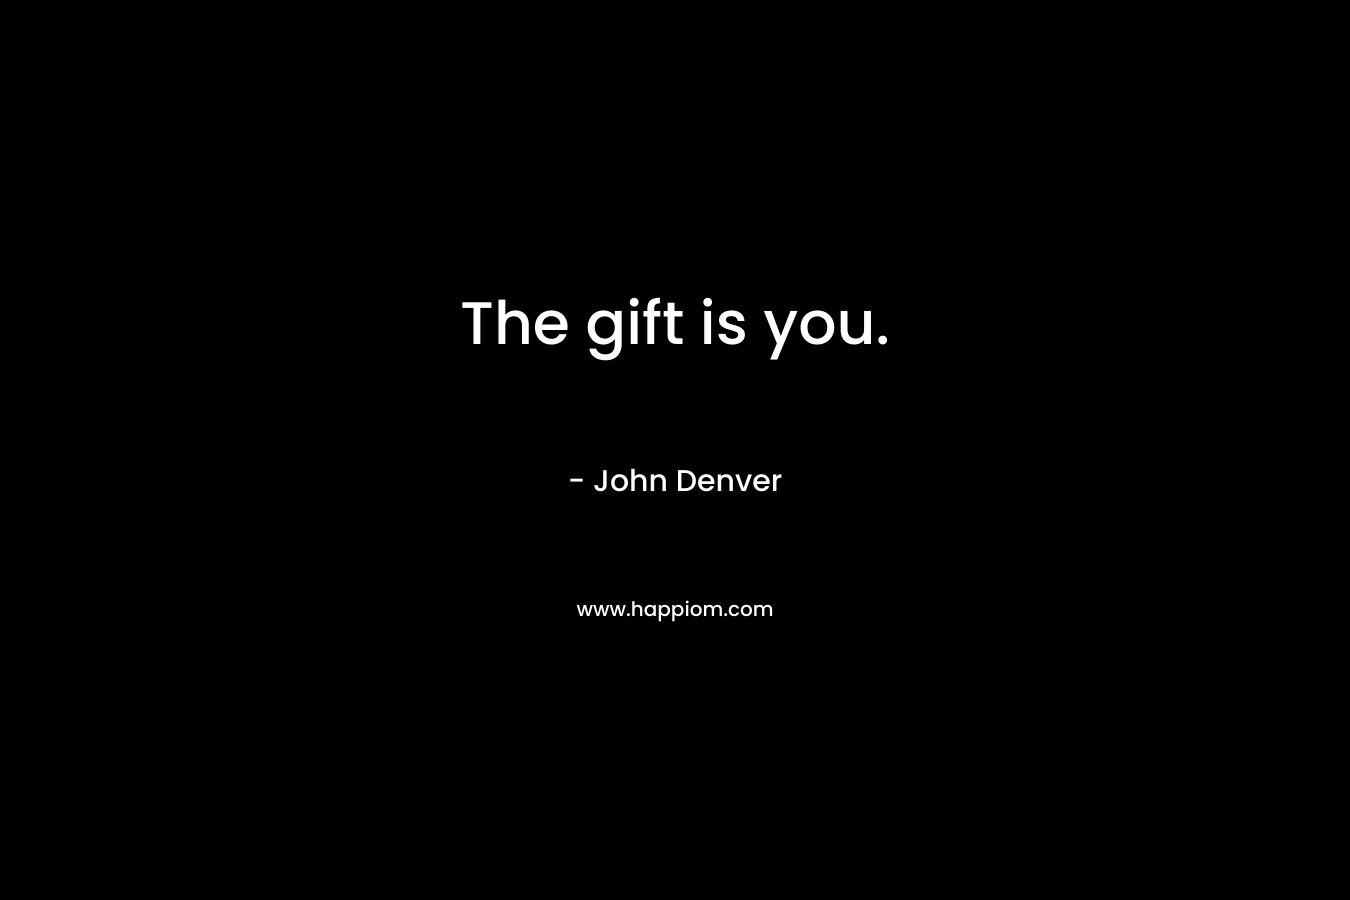 The gift is you.